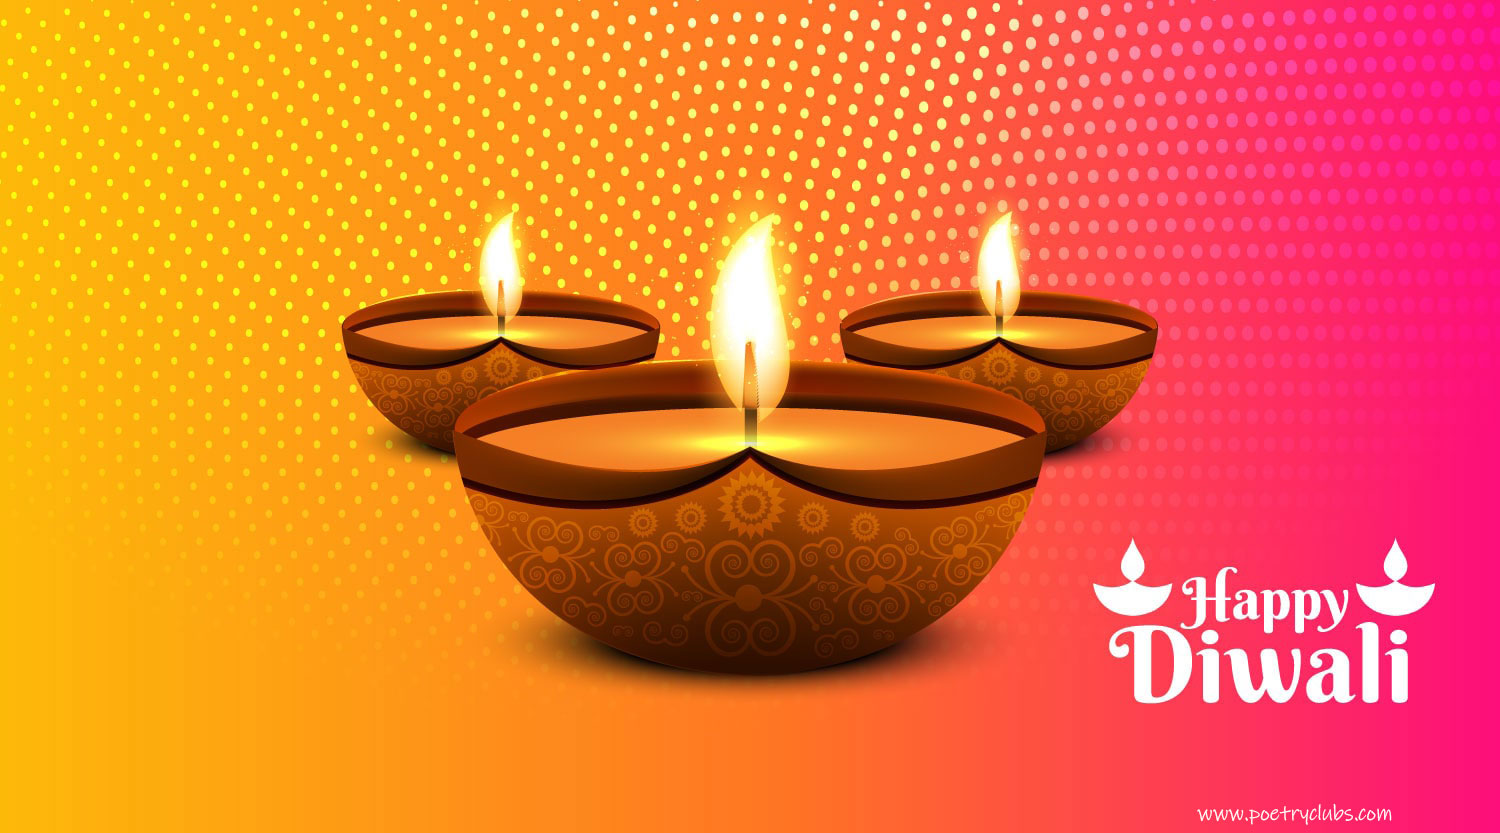 Happy Diwali 2021 Image, Wallpaper, Wishes, Quotes & Diwali Messages